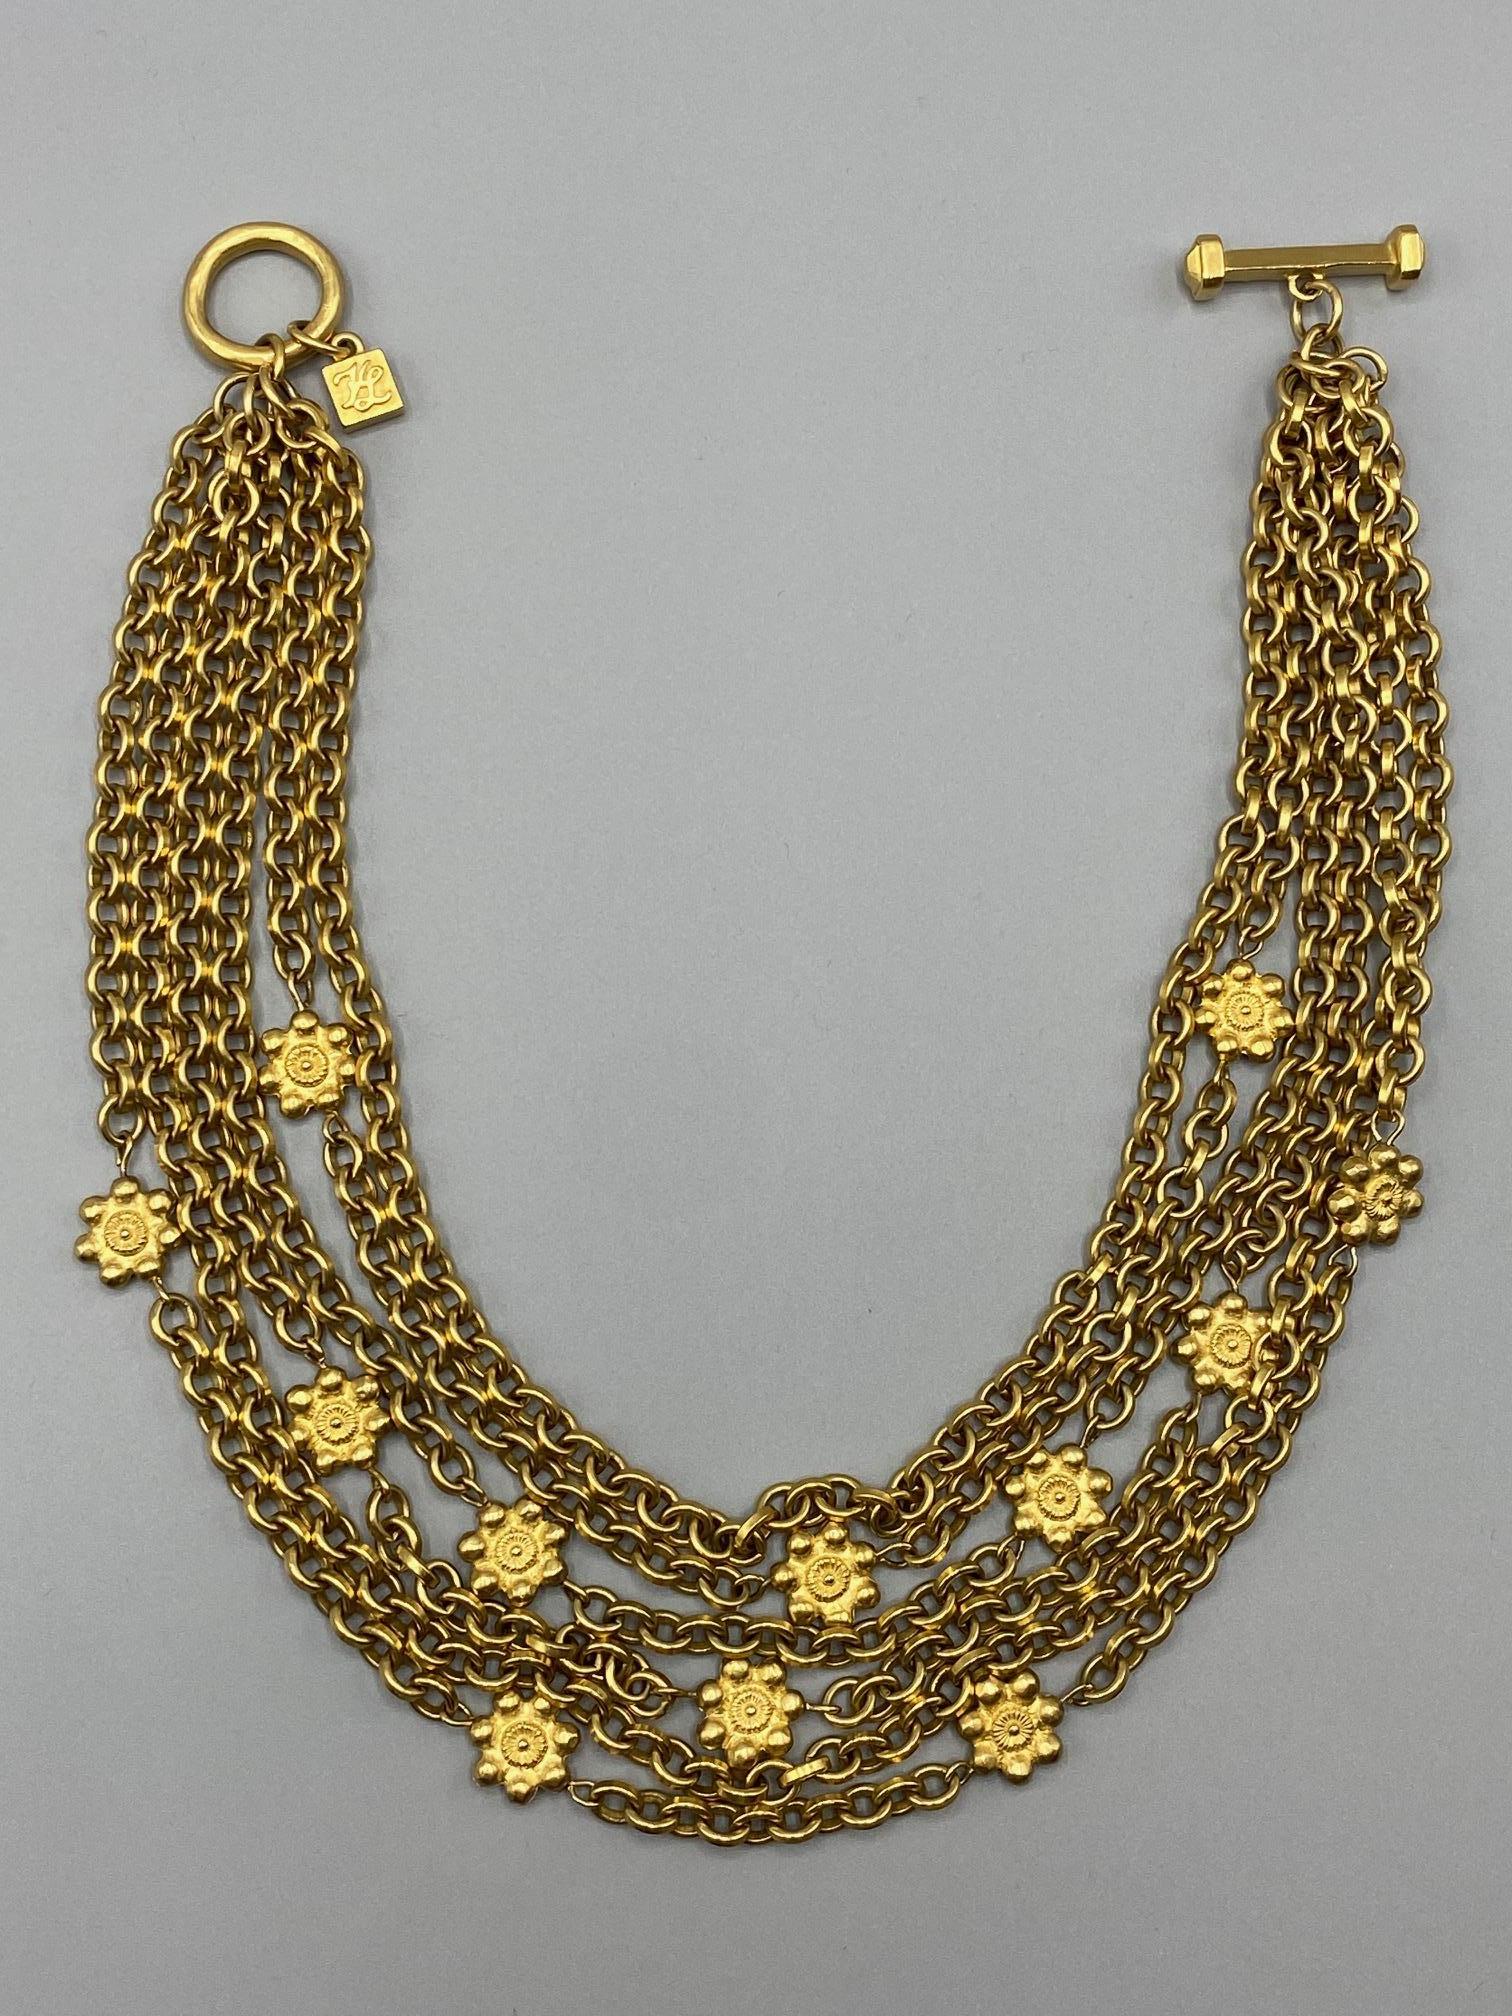 Karl Lagerfeld 1980s Six Strand Gold Toggle Necklace For Sale 4